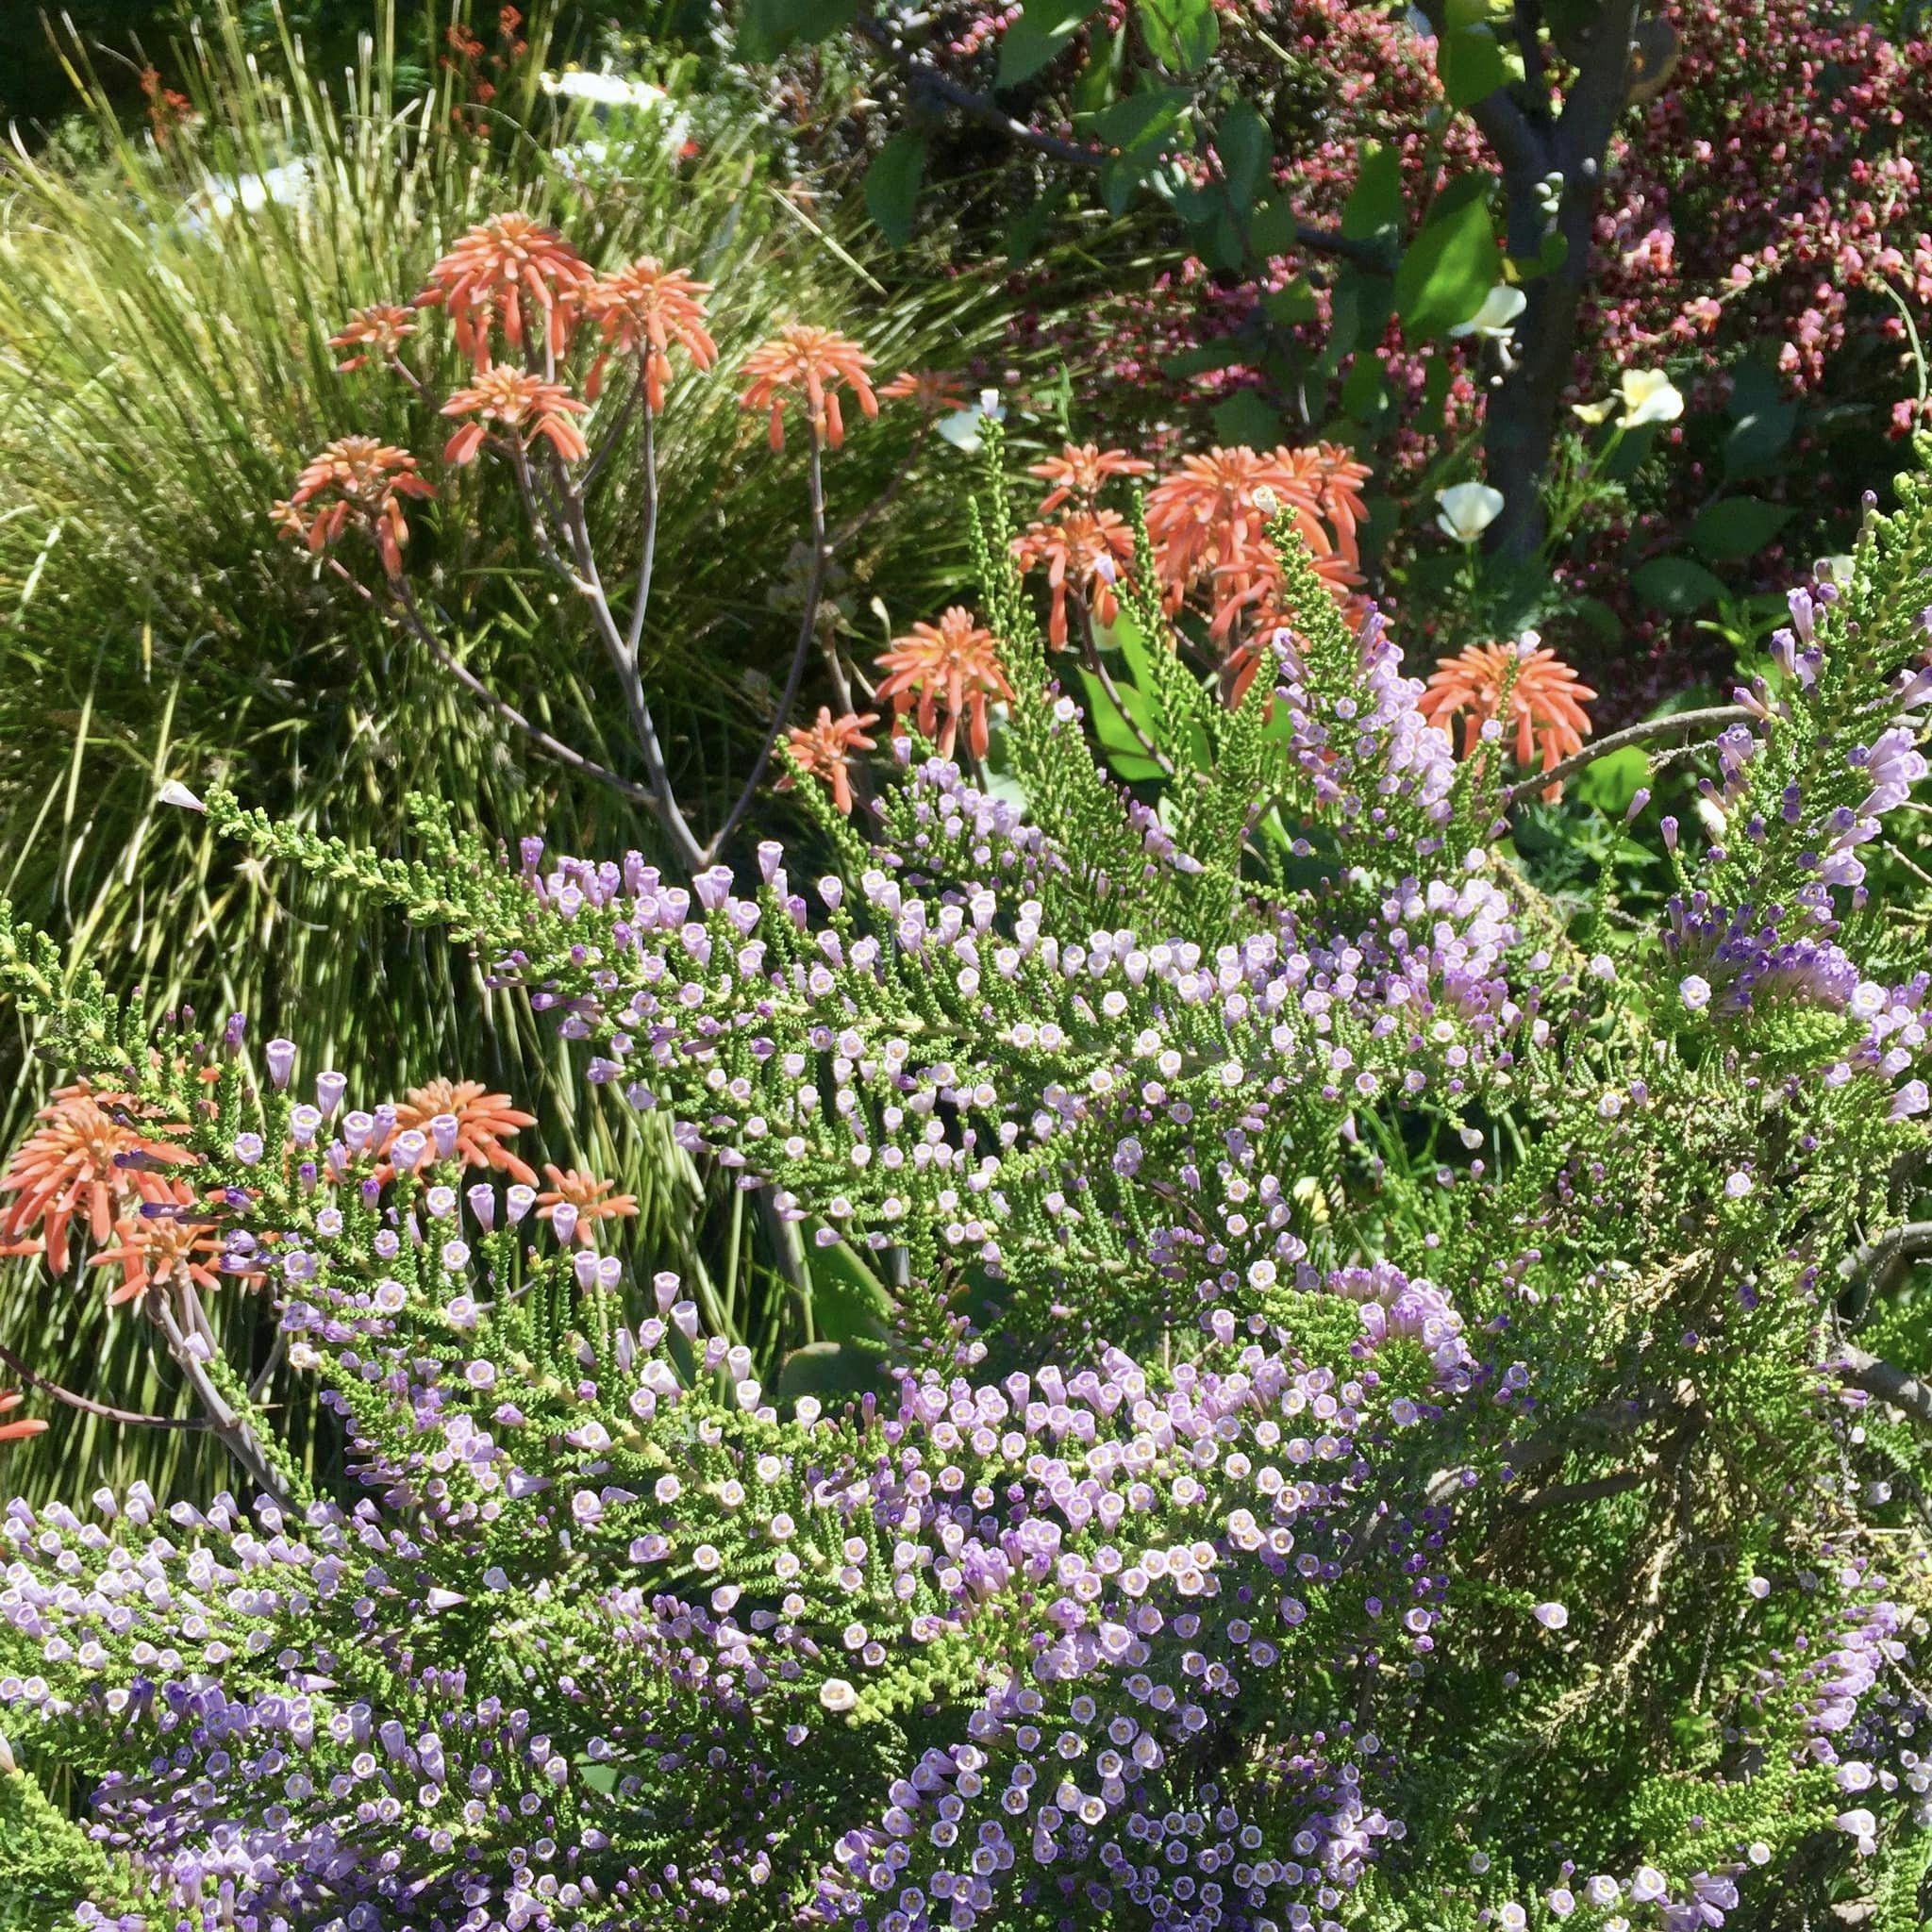 Discover the Wonders of Waltzing Matilija Nursery: Unique Plants to Transform Your Garden